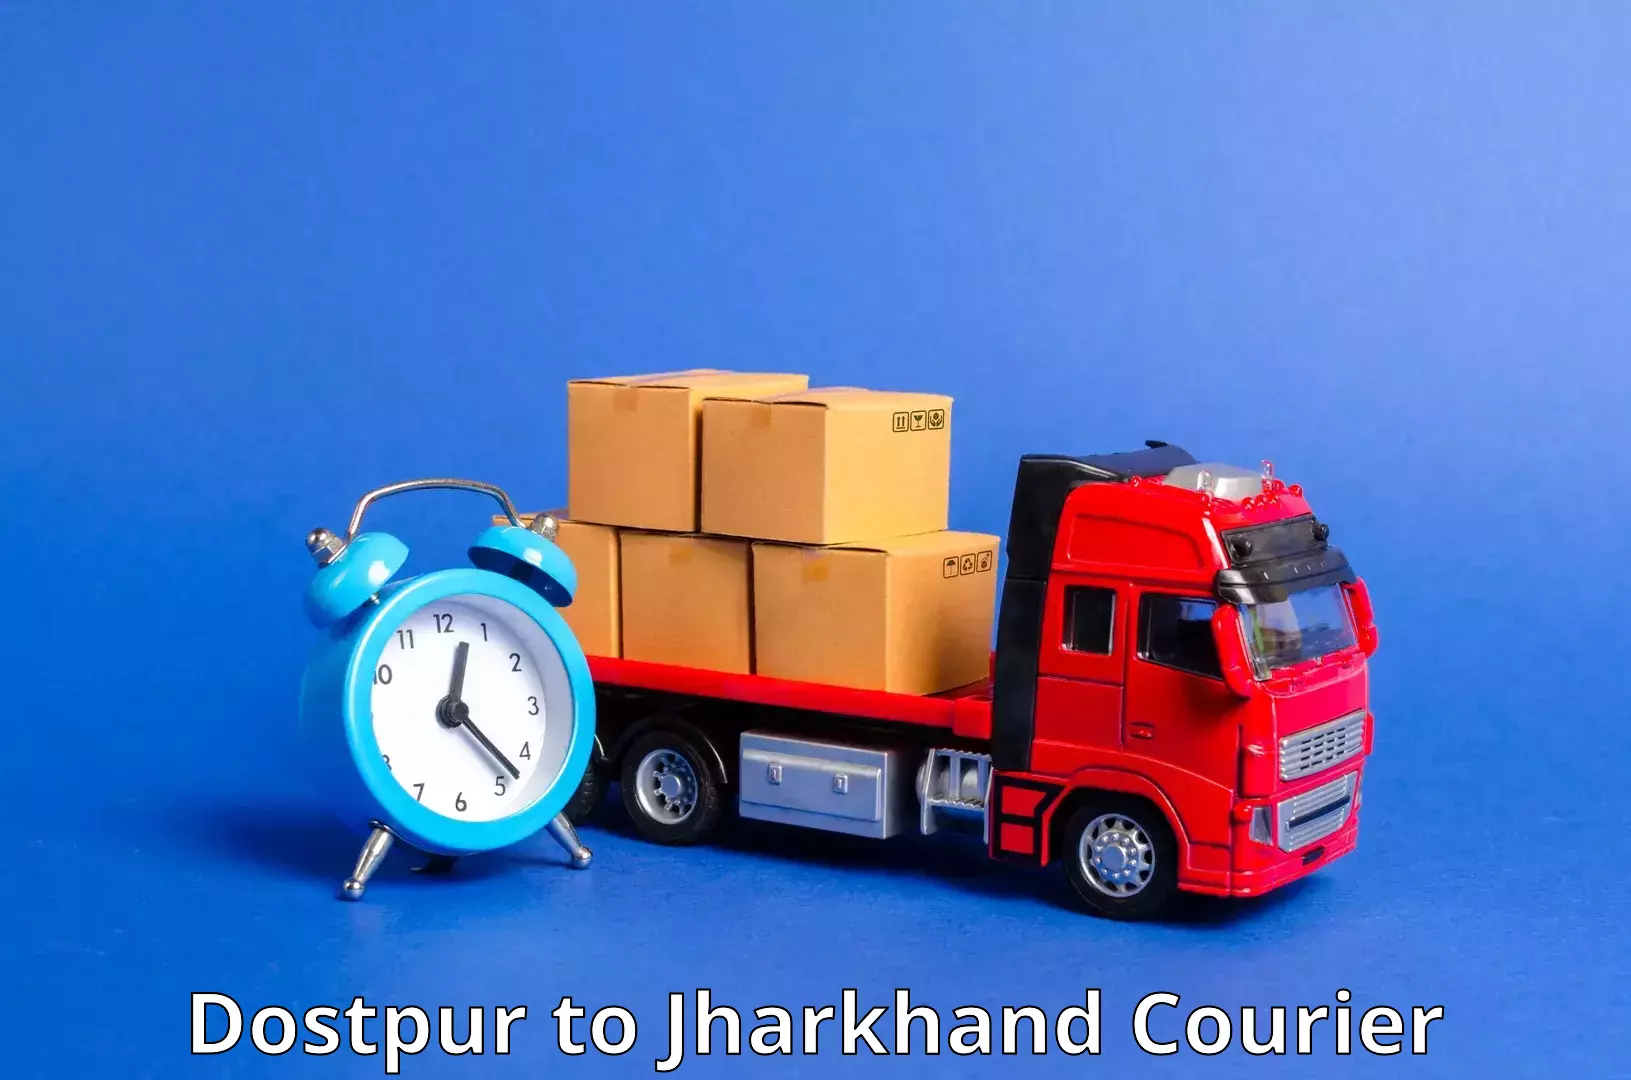 State-of-the-art courier technology Dostpur to Hazaribagh